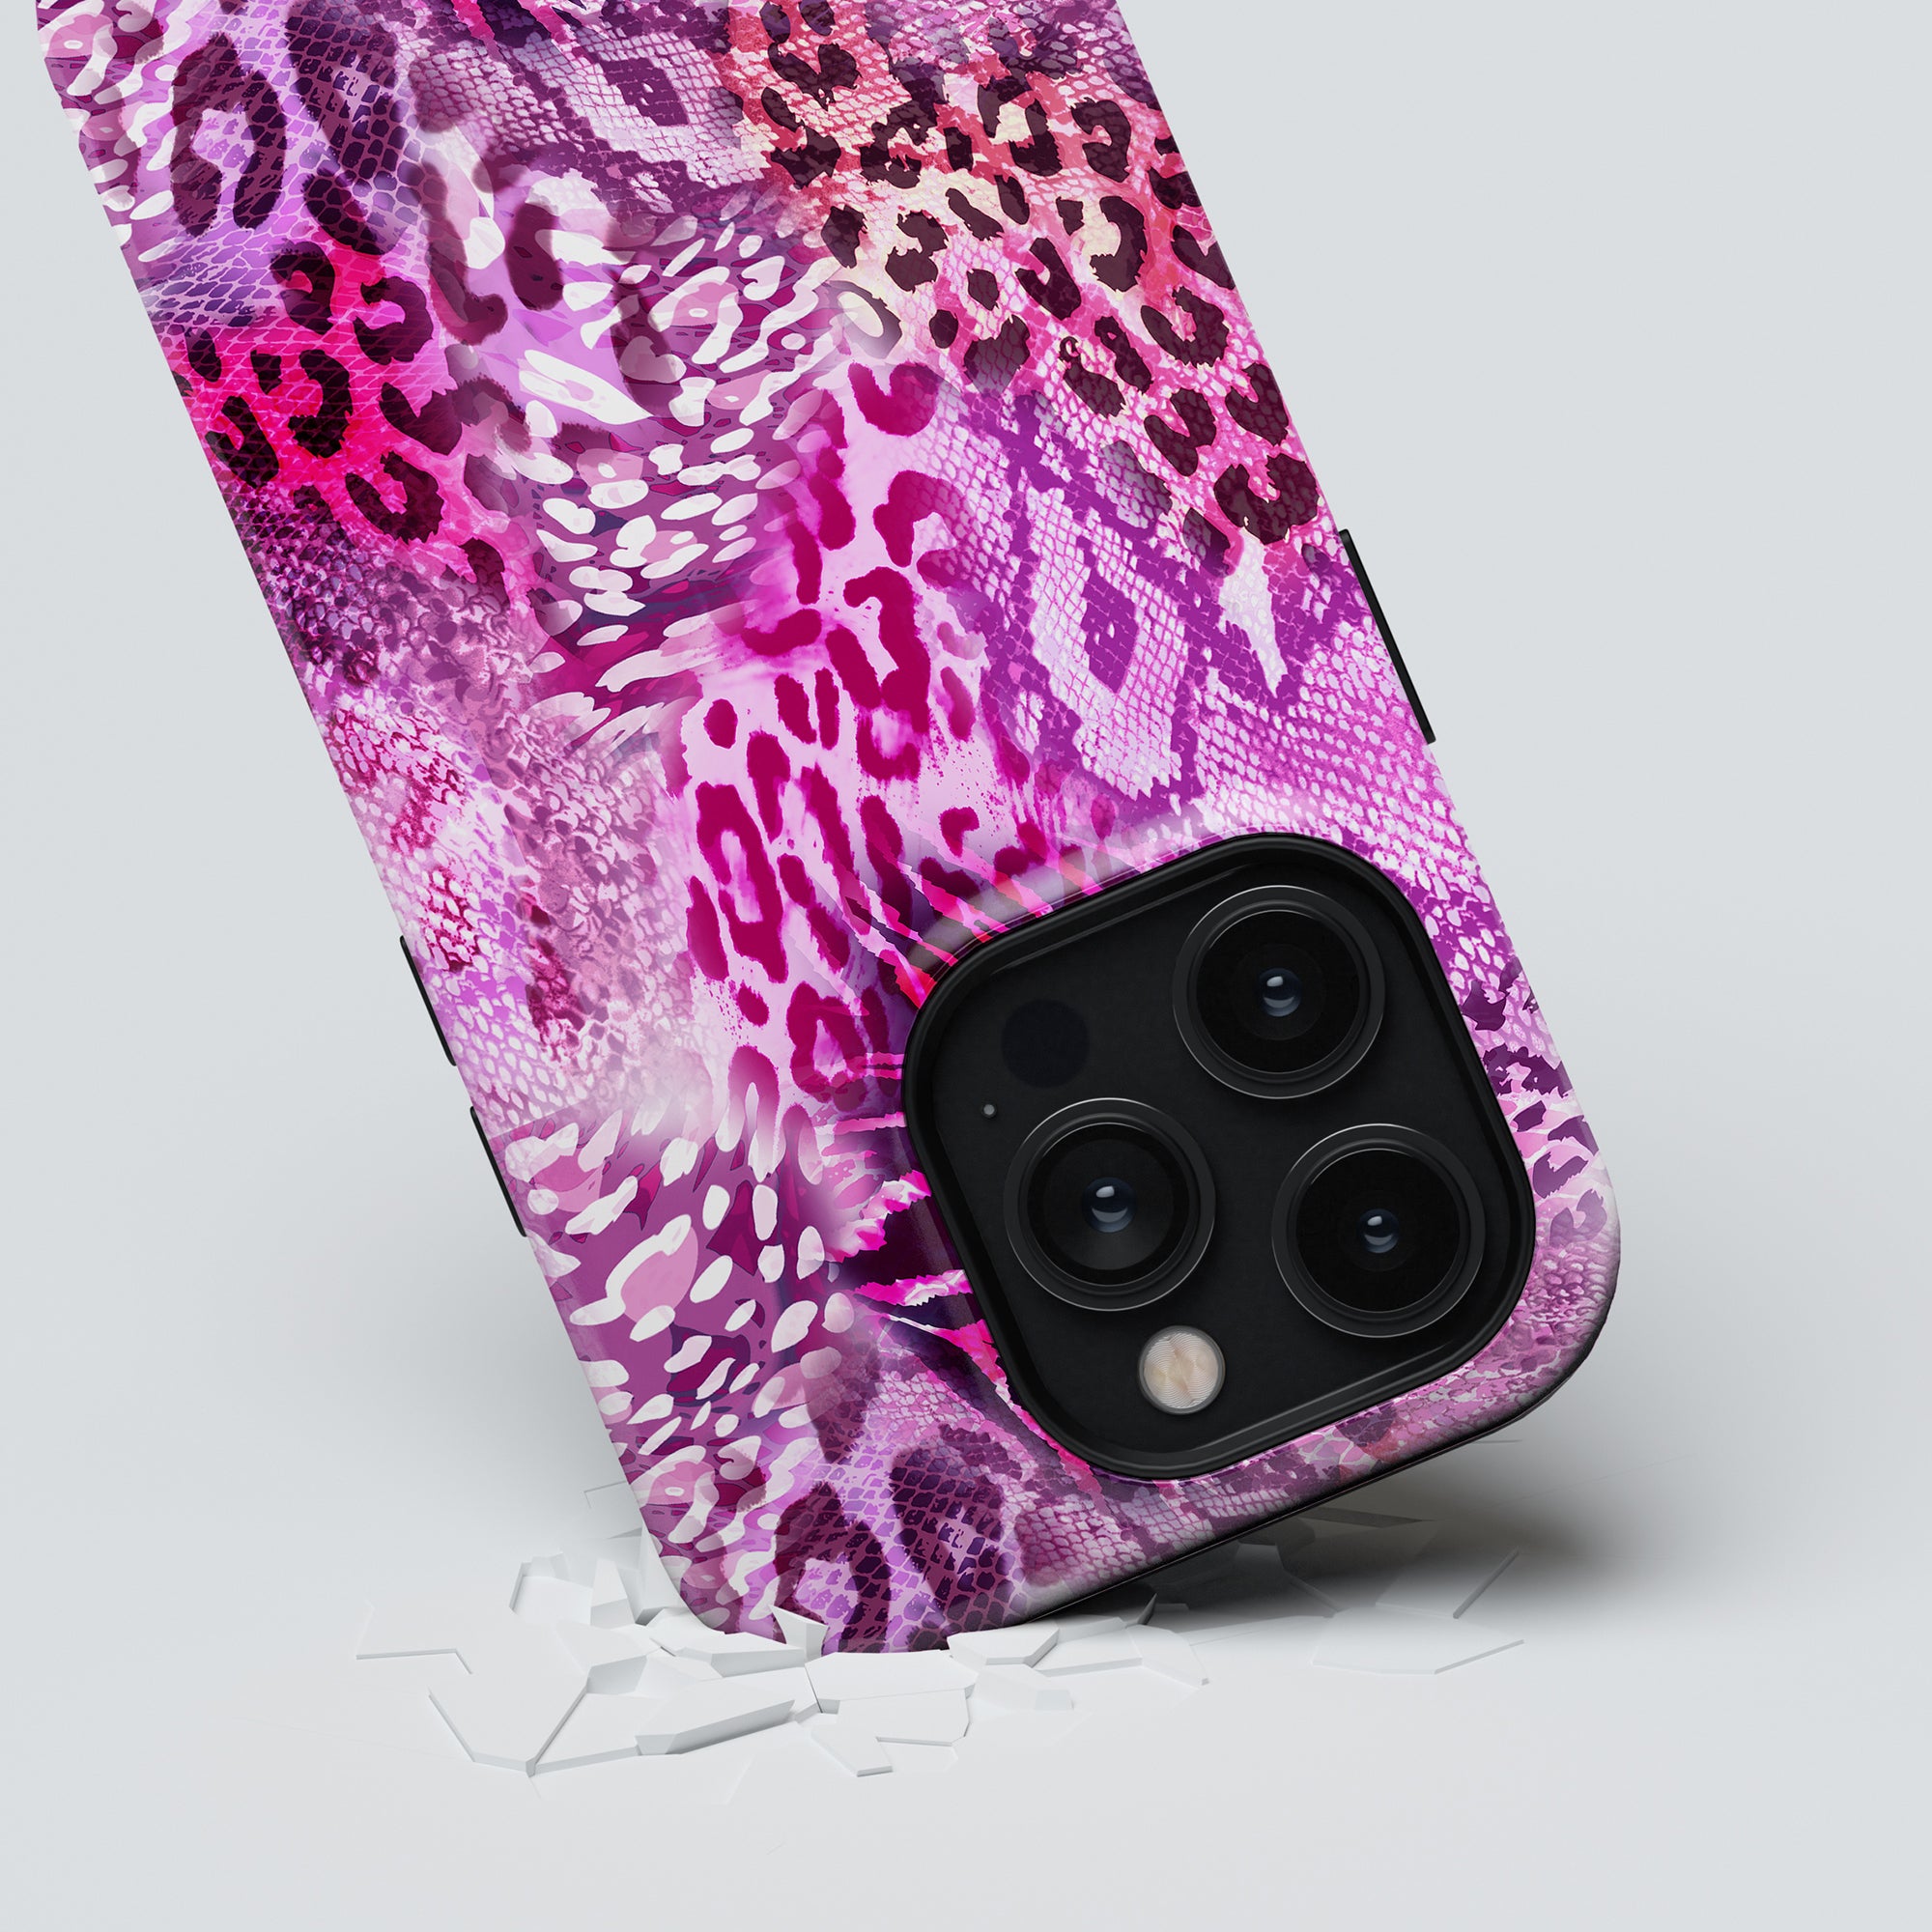 A smartphone with a Swirl Leopard tough case from the Hybrid Collection, featuring a triple-lens camera, partially submerged in a shattered glass surface.